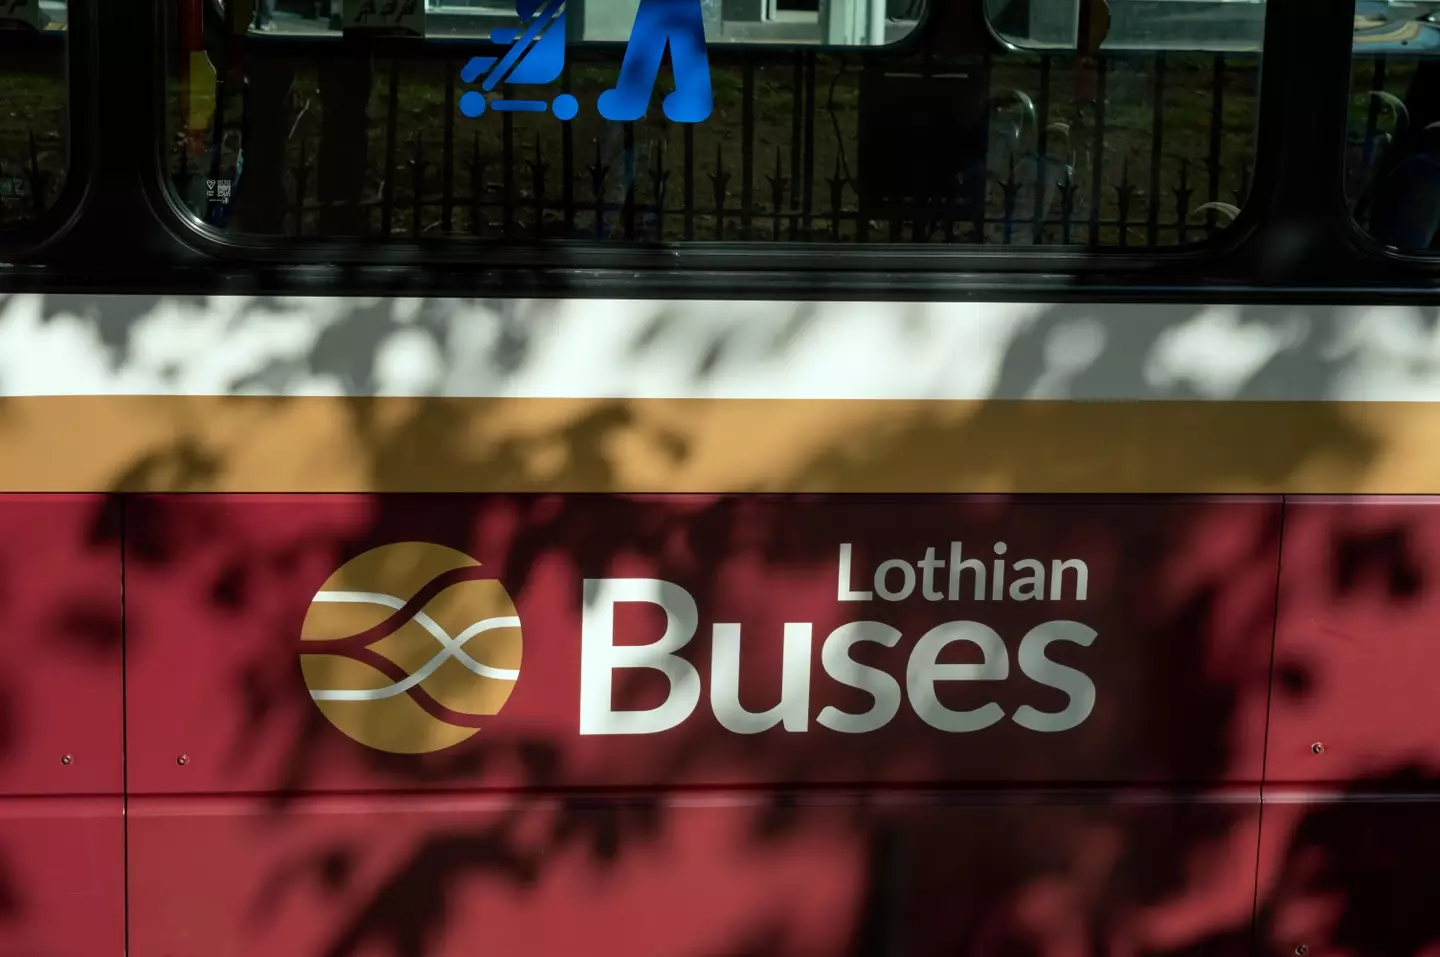 Lothian Buses has launched an investigation.